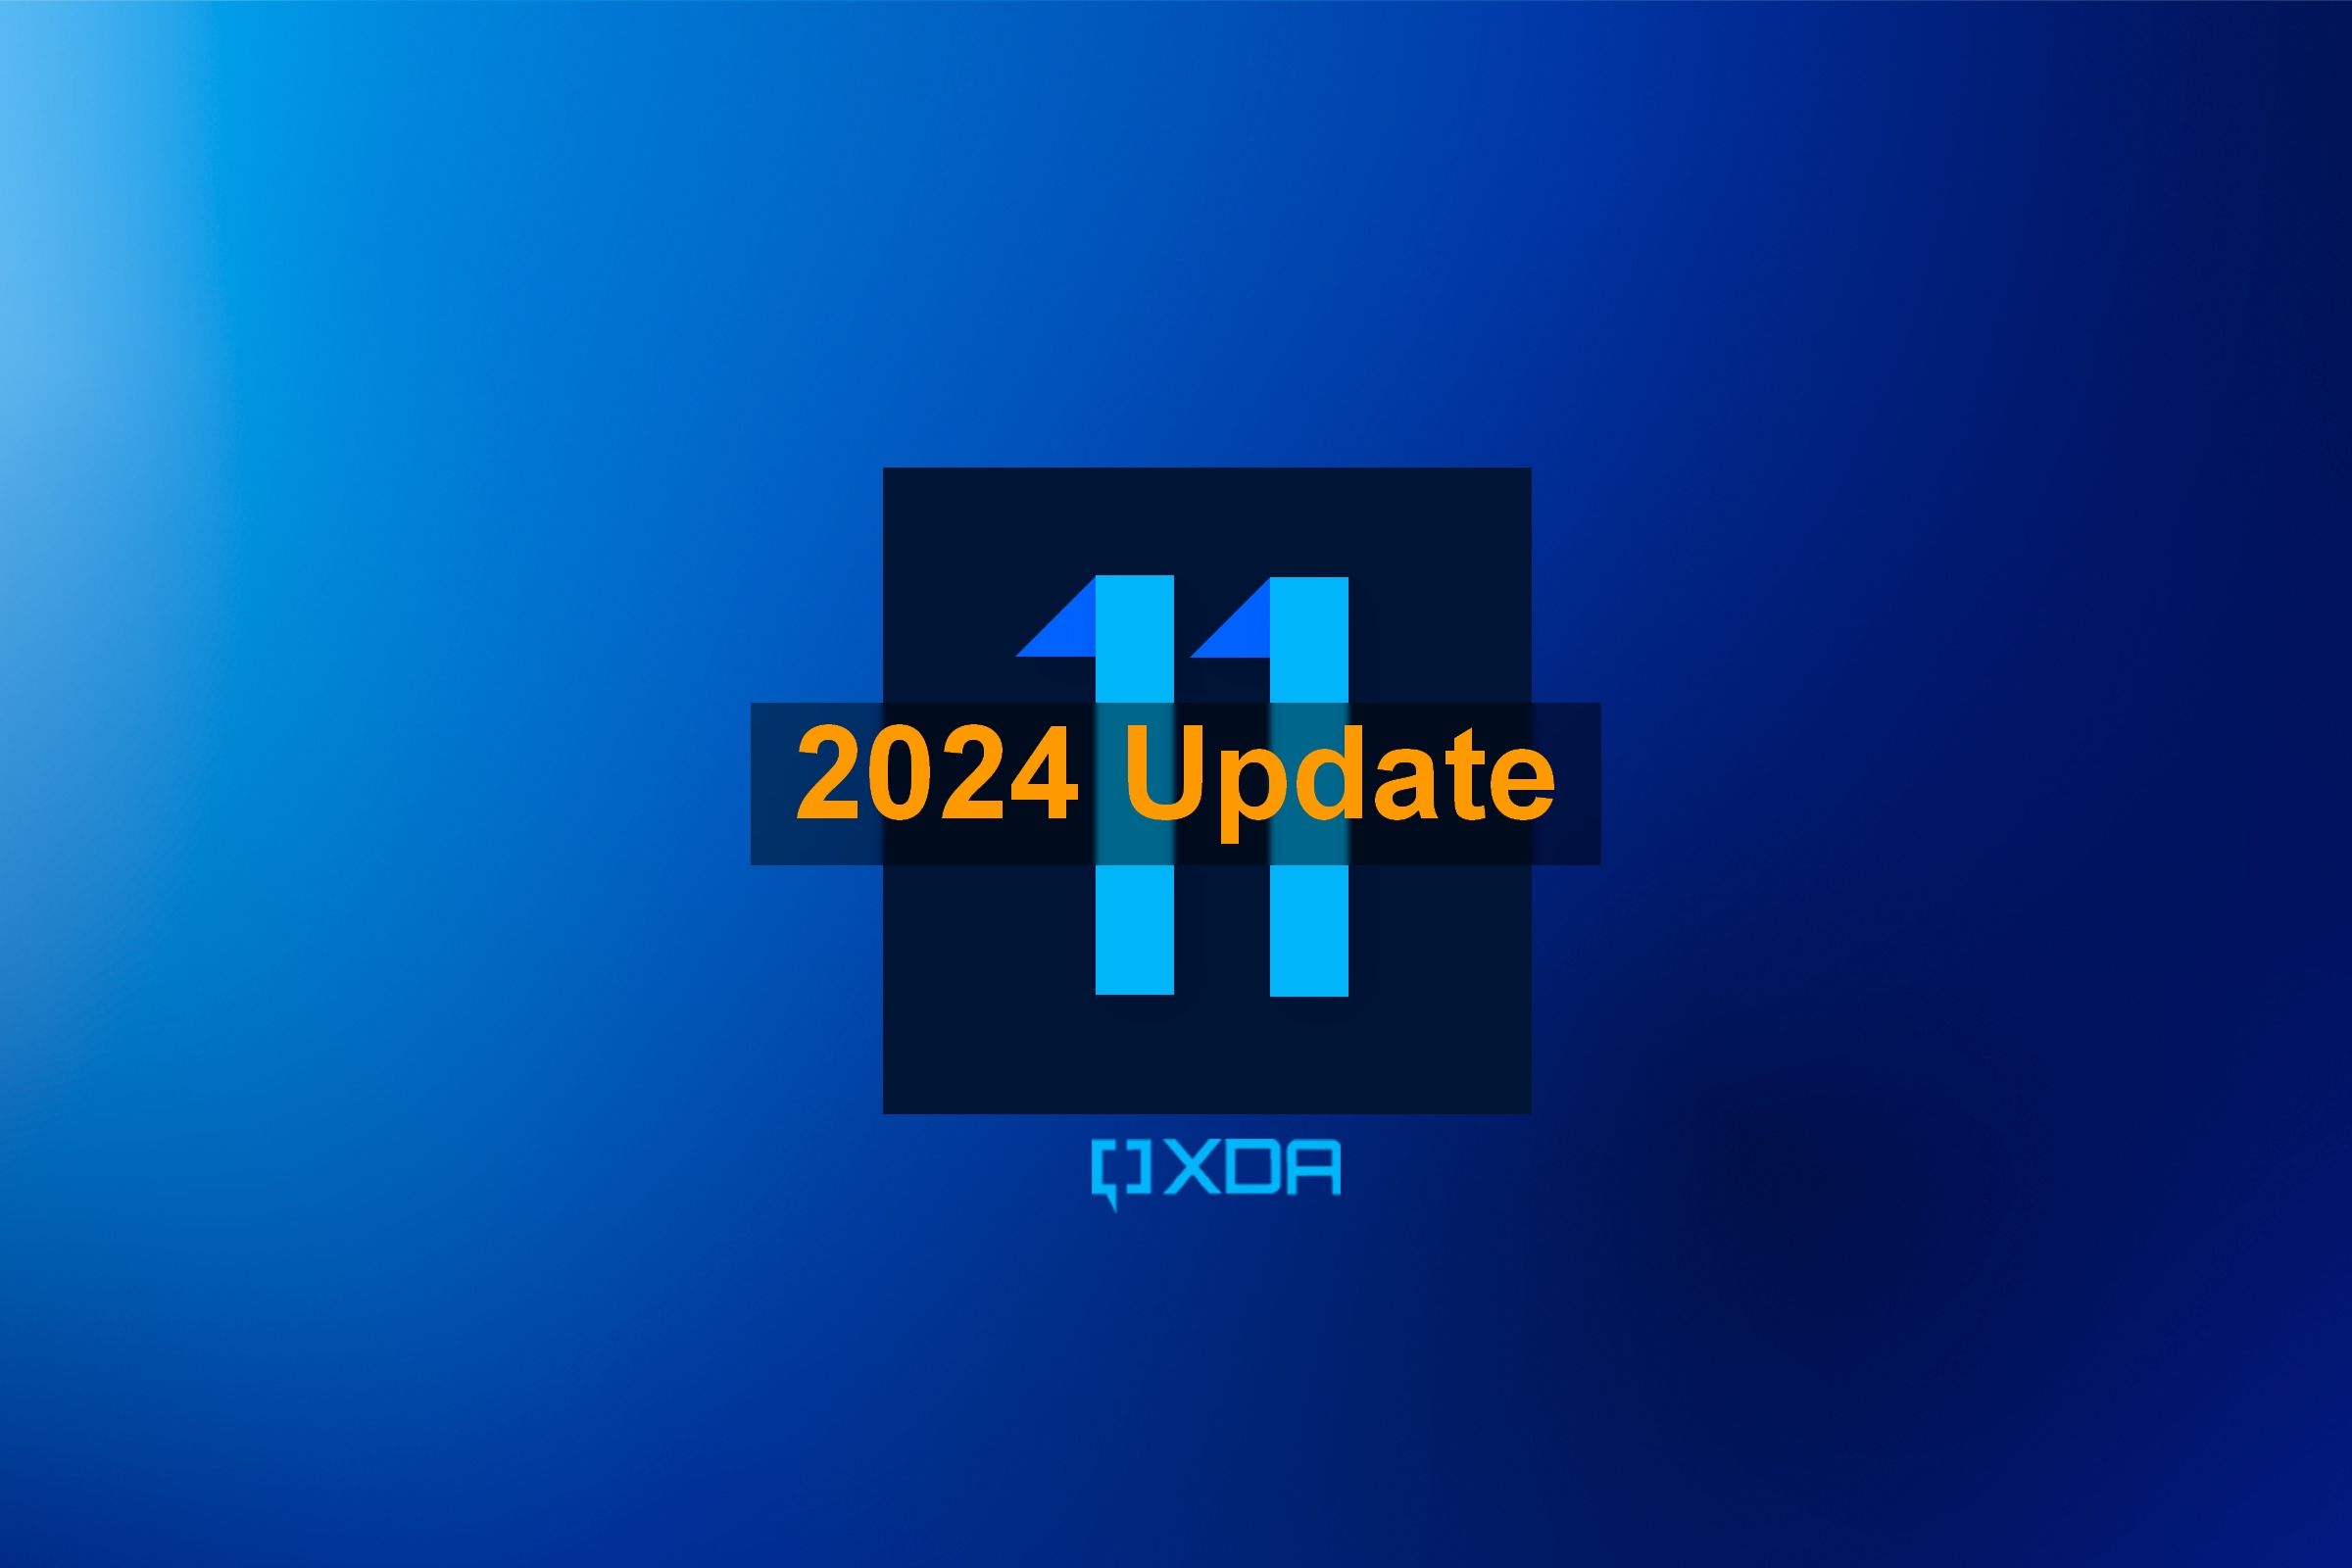 An image of symbolizing Windows 11 with the words 2024 Update overlaid on top